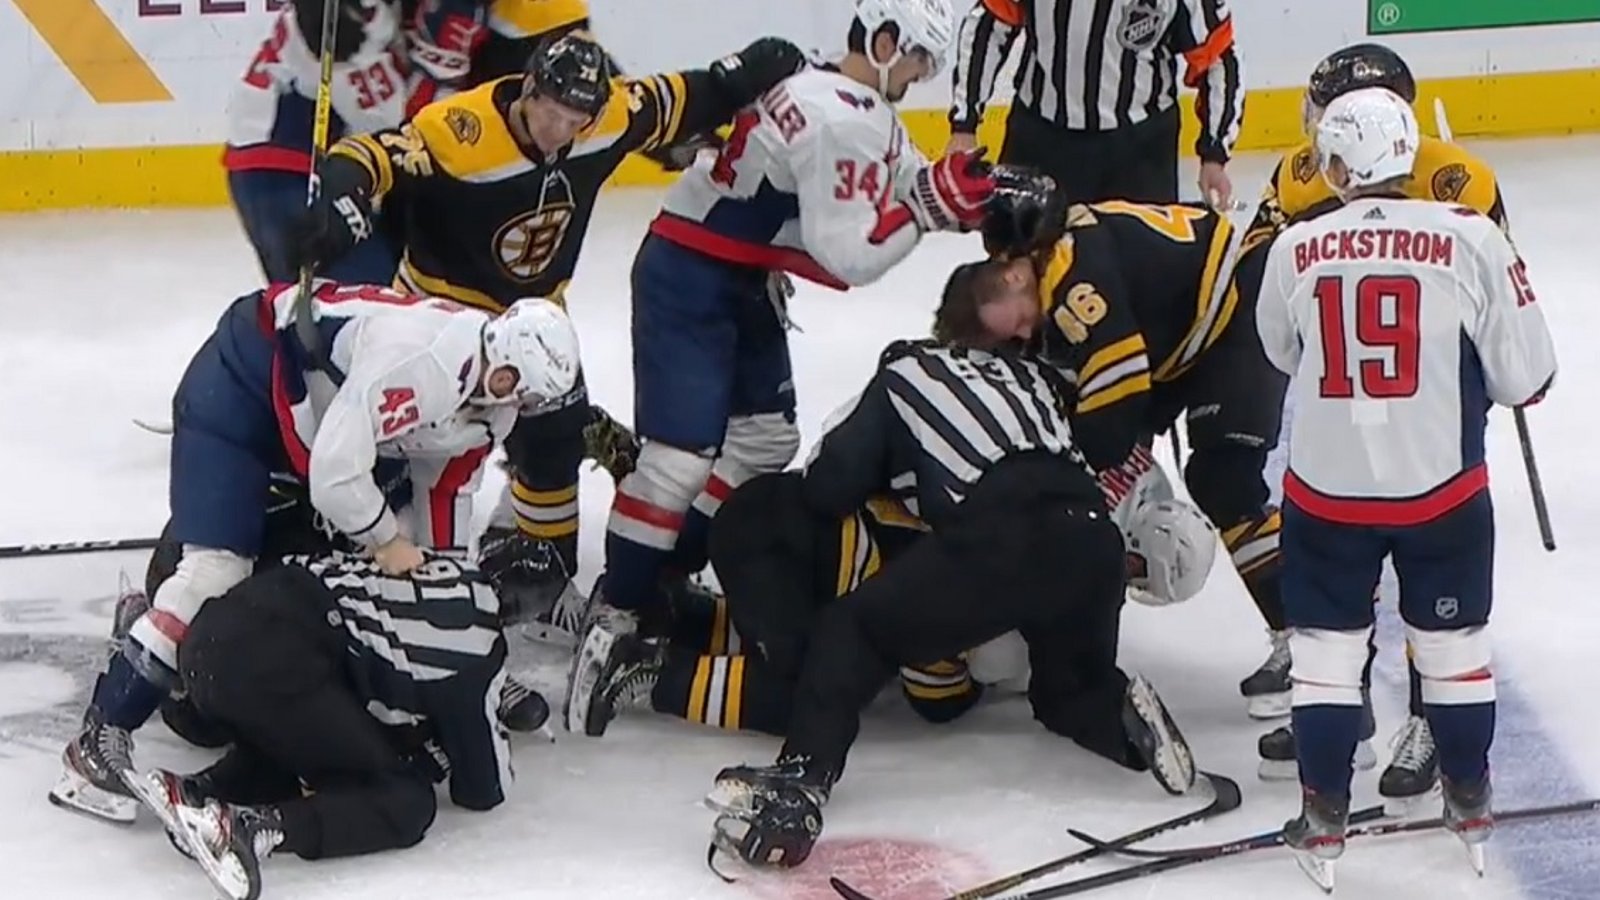 David Pastrnak goes after Tom Wilson and all hell breaks loose!